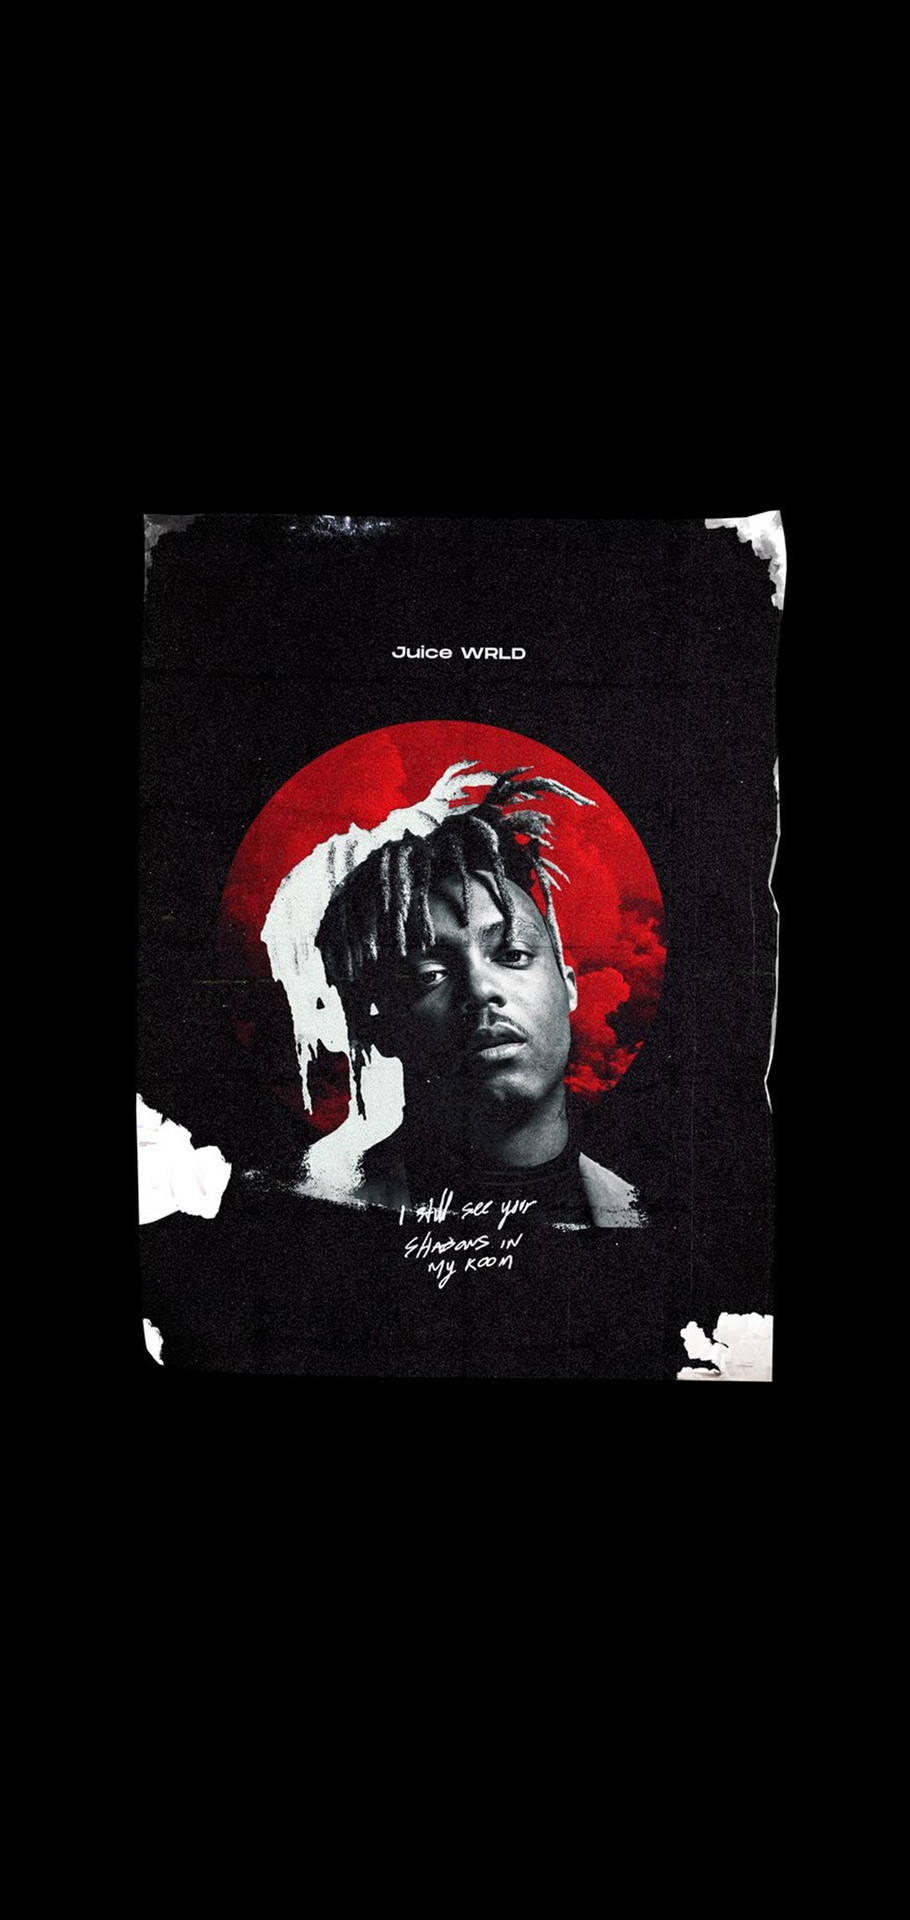 Download Juice Wrld Aesthetic In Red Out Of Car Wallpaper